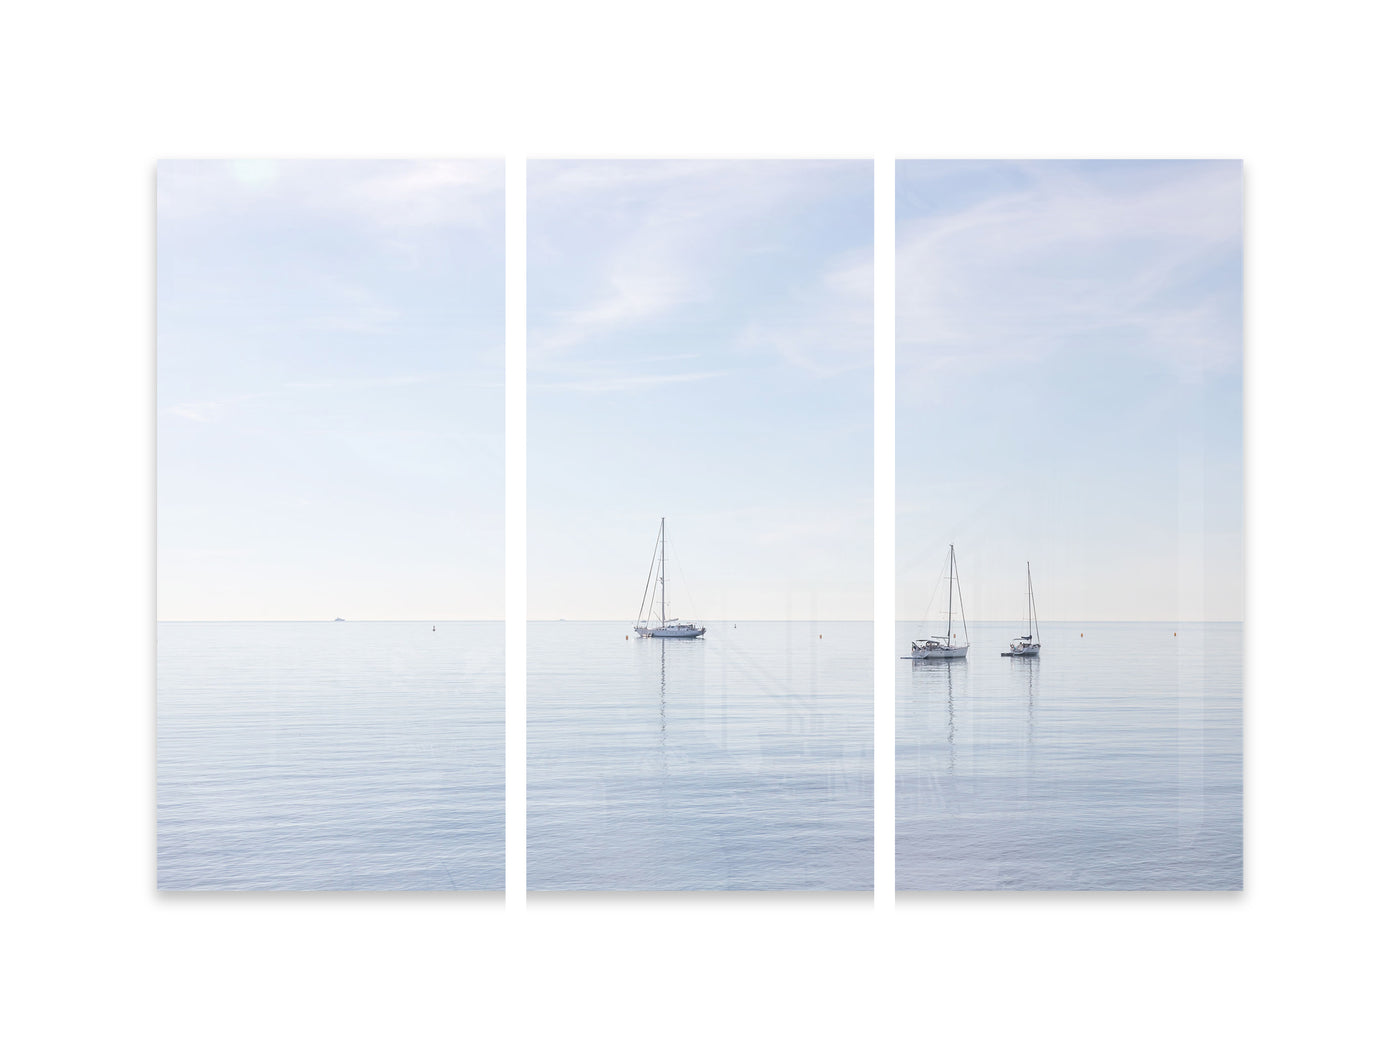 Boats No 6 - Coastal triptych by Cattie Coyle Photography